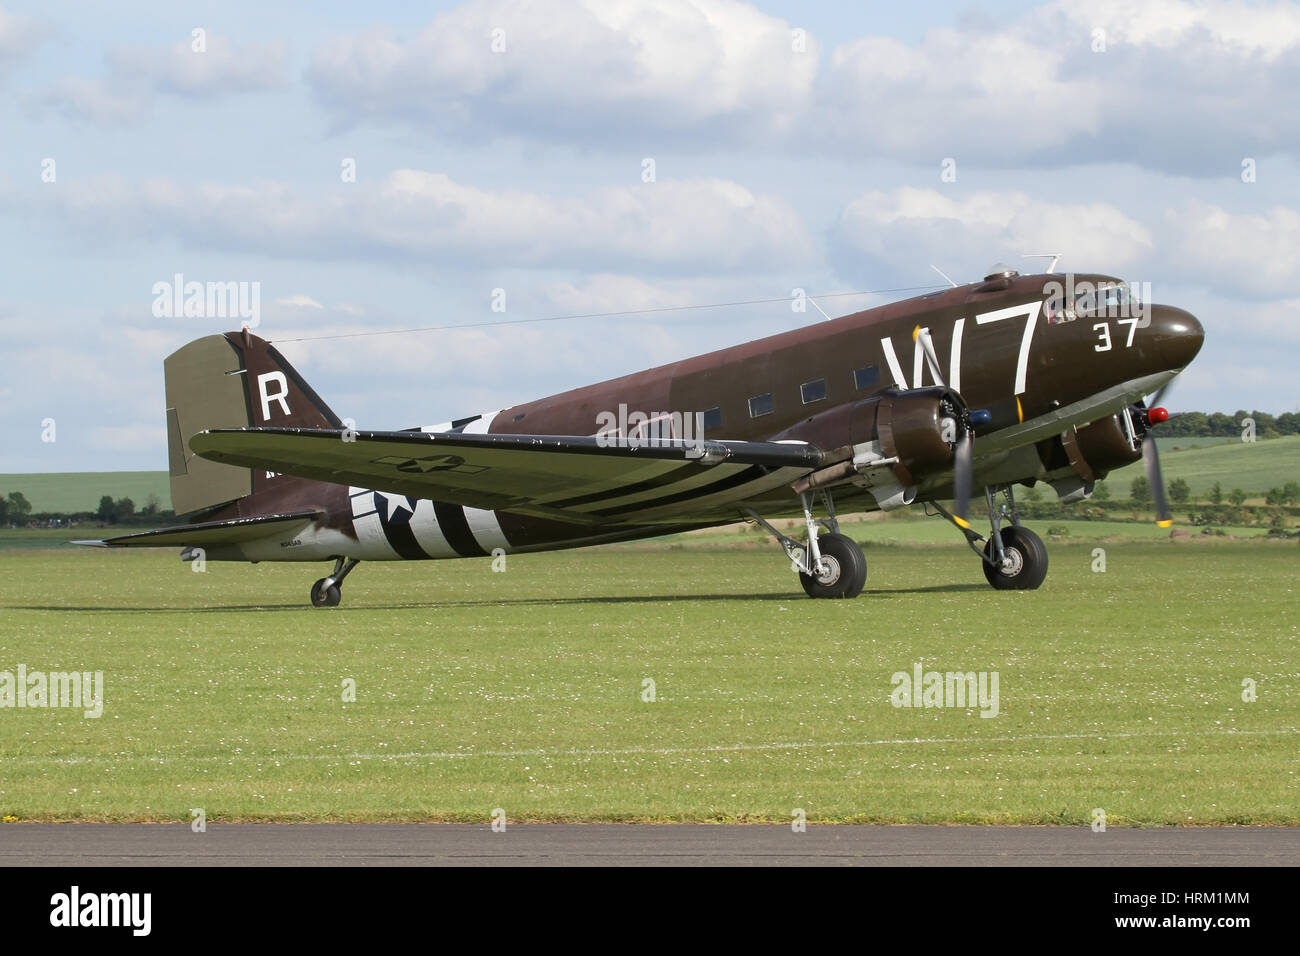 US based Douglas DC-3 landing at the D-Day anniversary airshow at Duxford in 2014. Duxford hosted a rare gathering of DC-3/C-47s for the event. Stock Photo